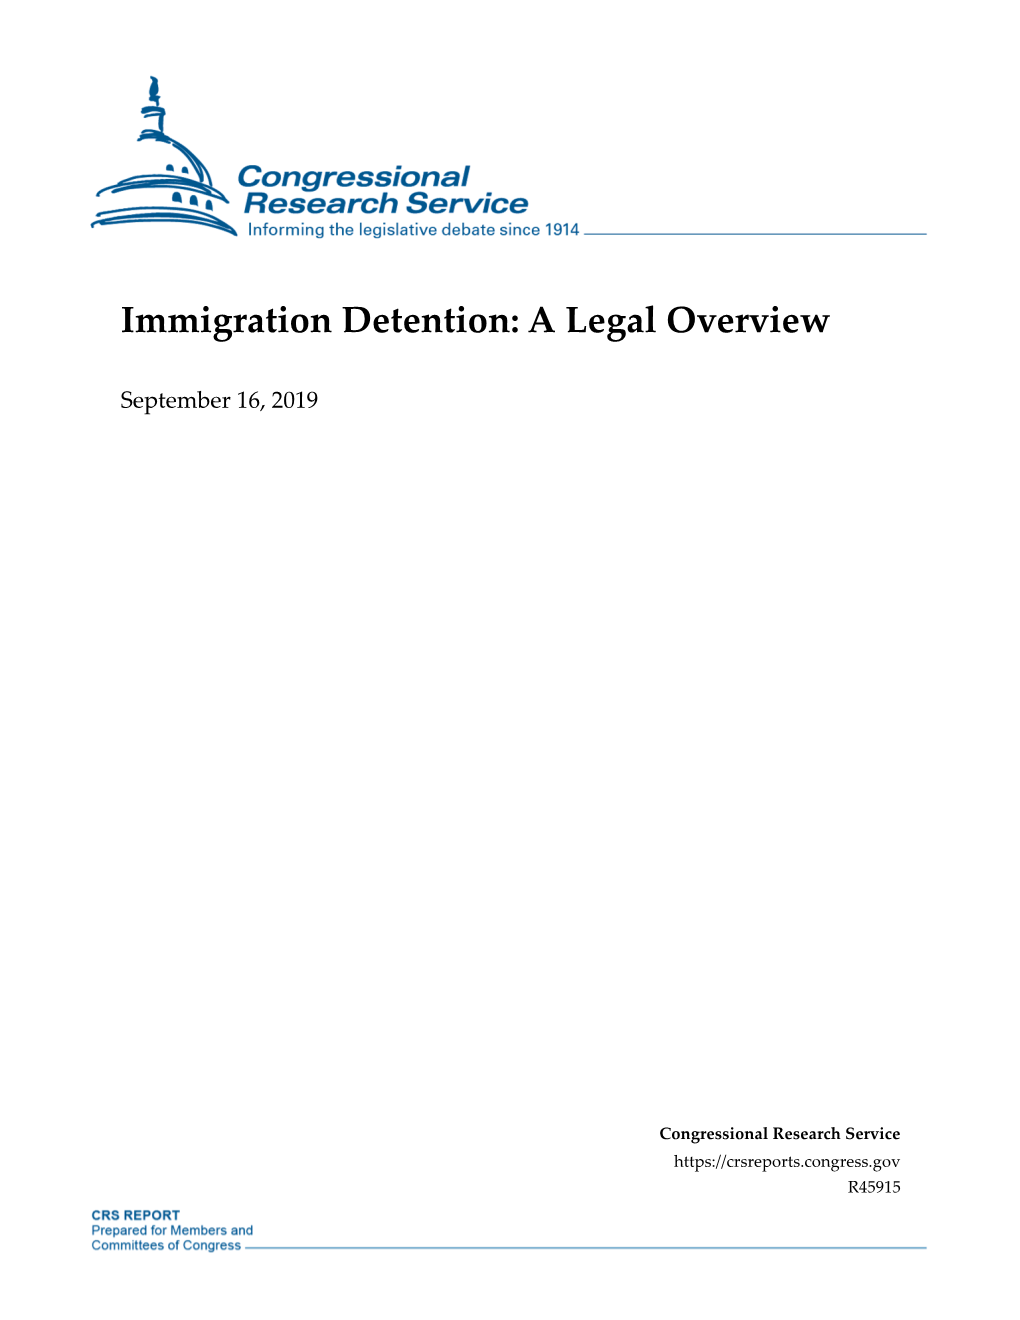 Immigration Detention: a Legal Overview